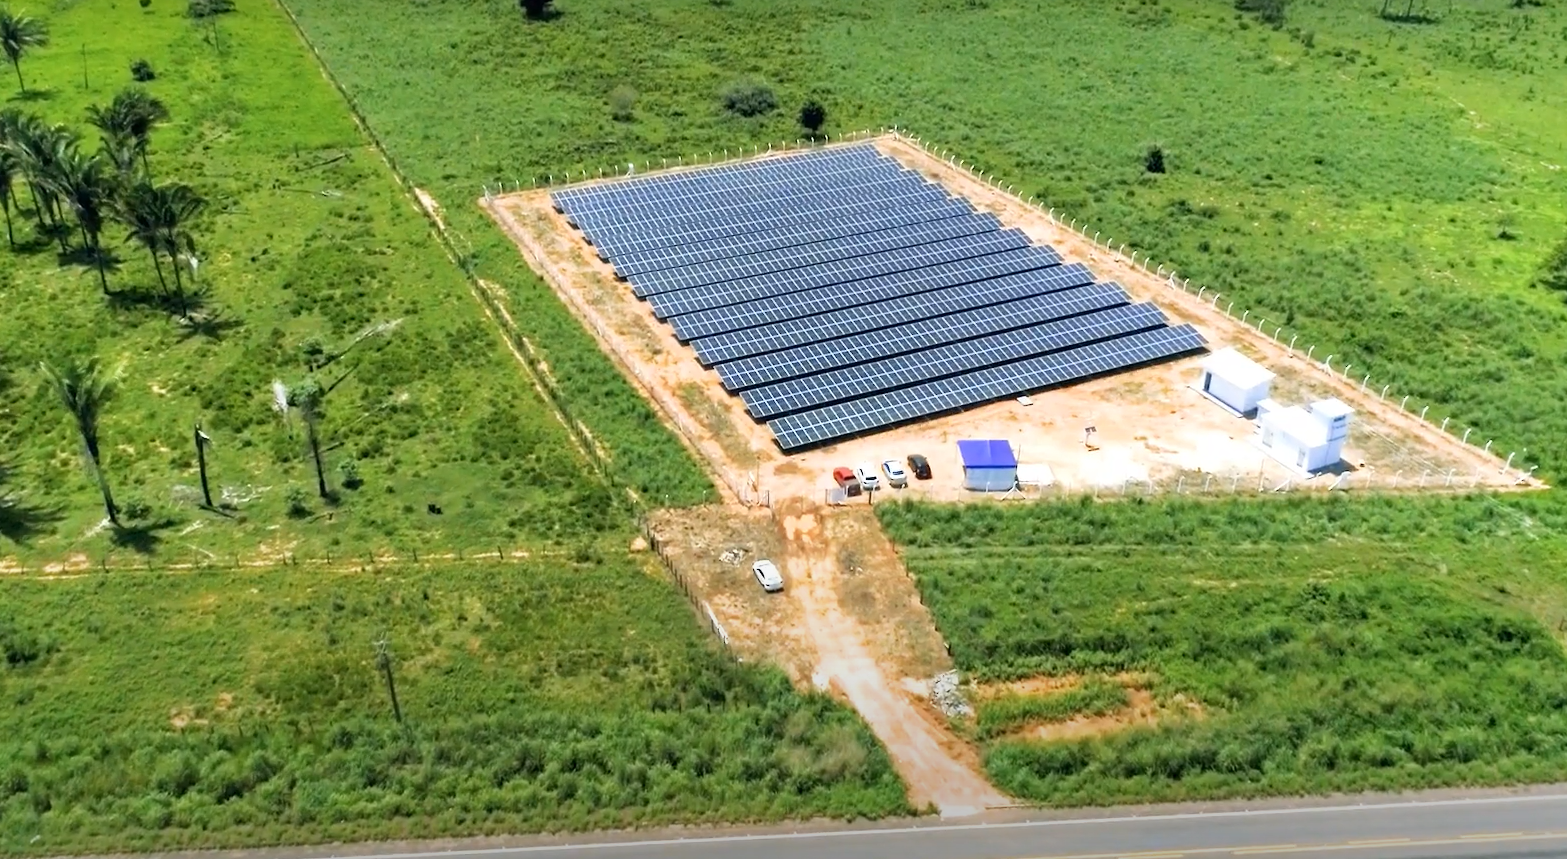 Shizen Energy to Begin Commercial Operation of Solar Power Plant in Brazil to Supply Power to Brazilian Furniture and Appliance Retail Chain